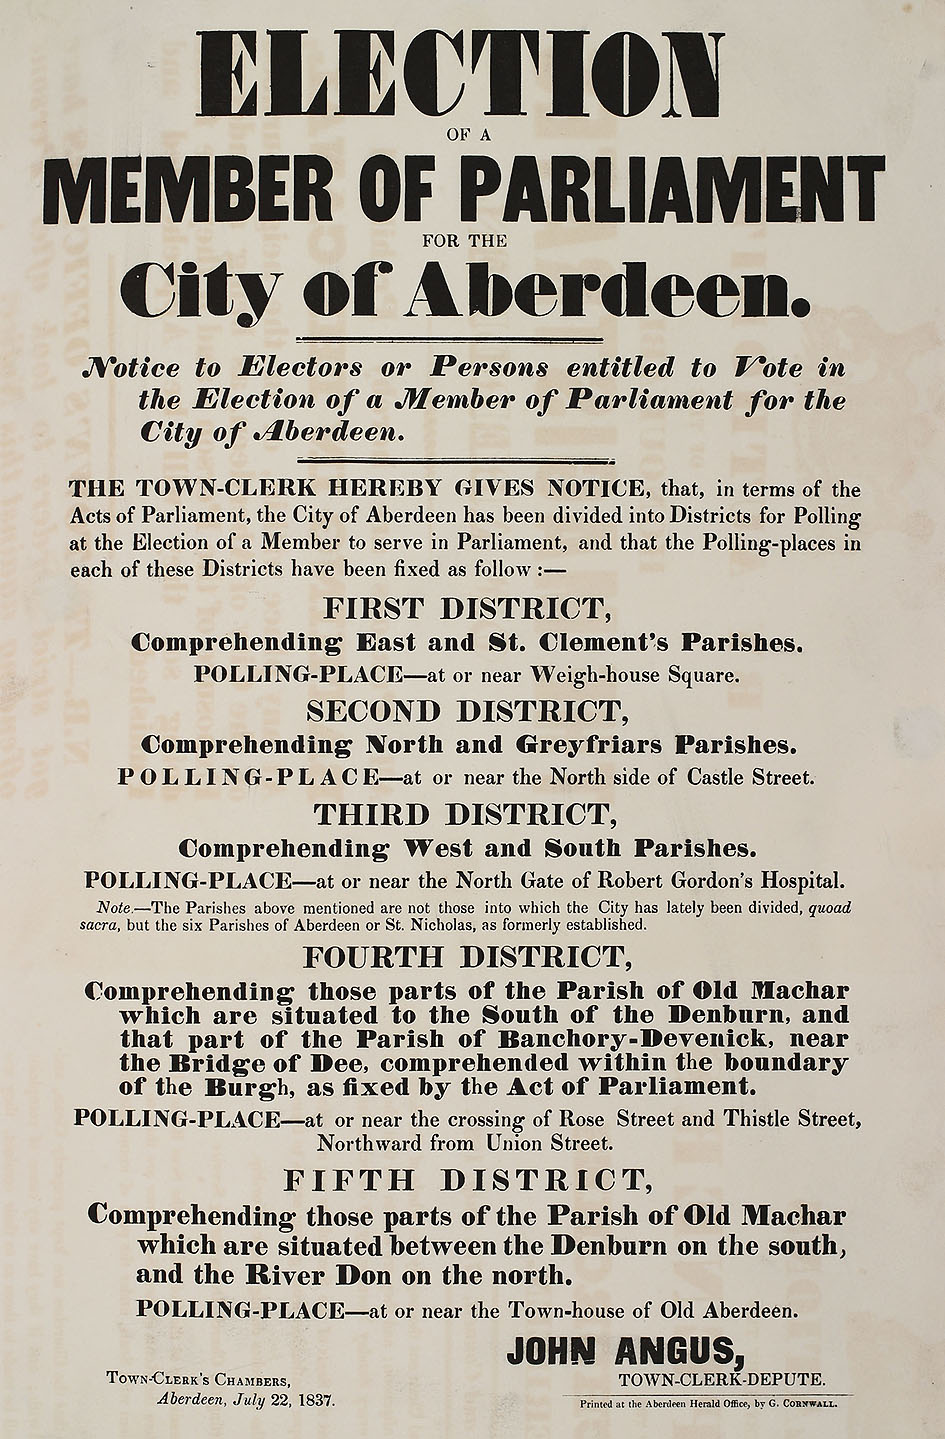 RAD109, Election of a Member of Parliament for the City of Aberdeen